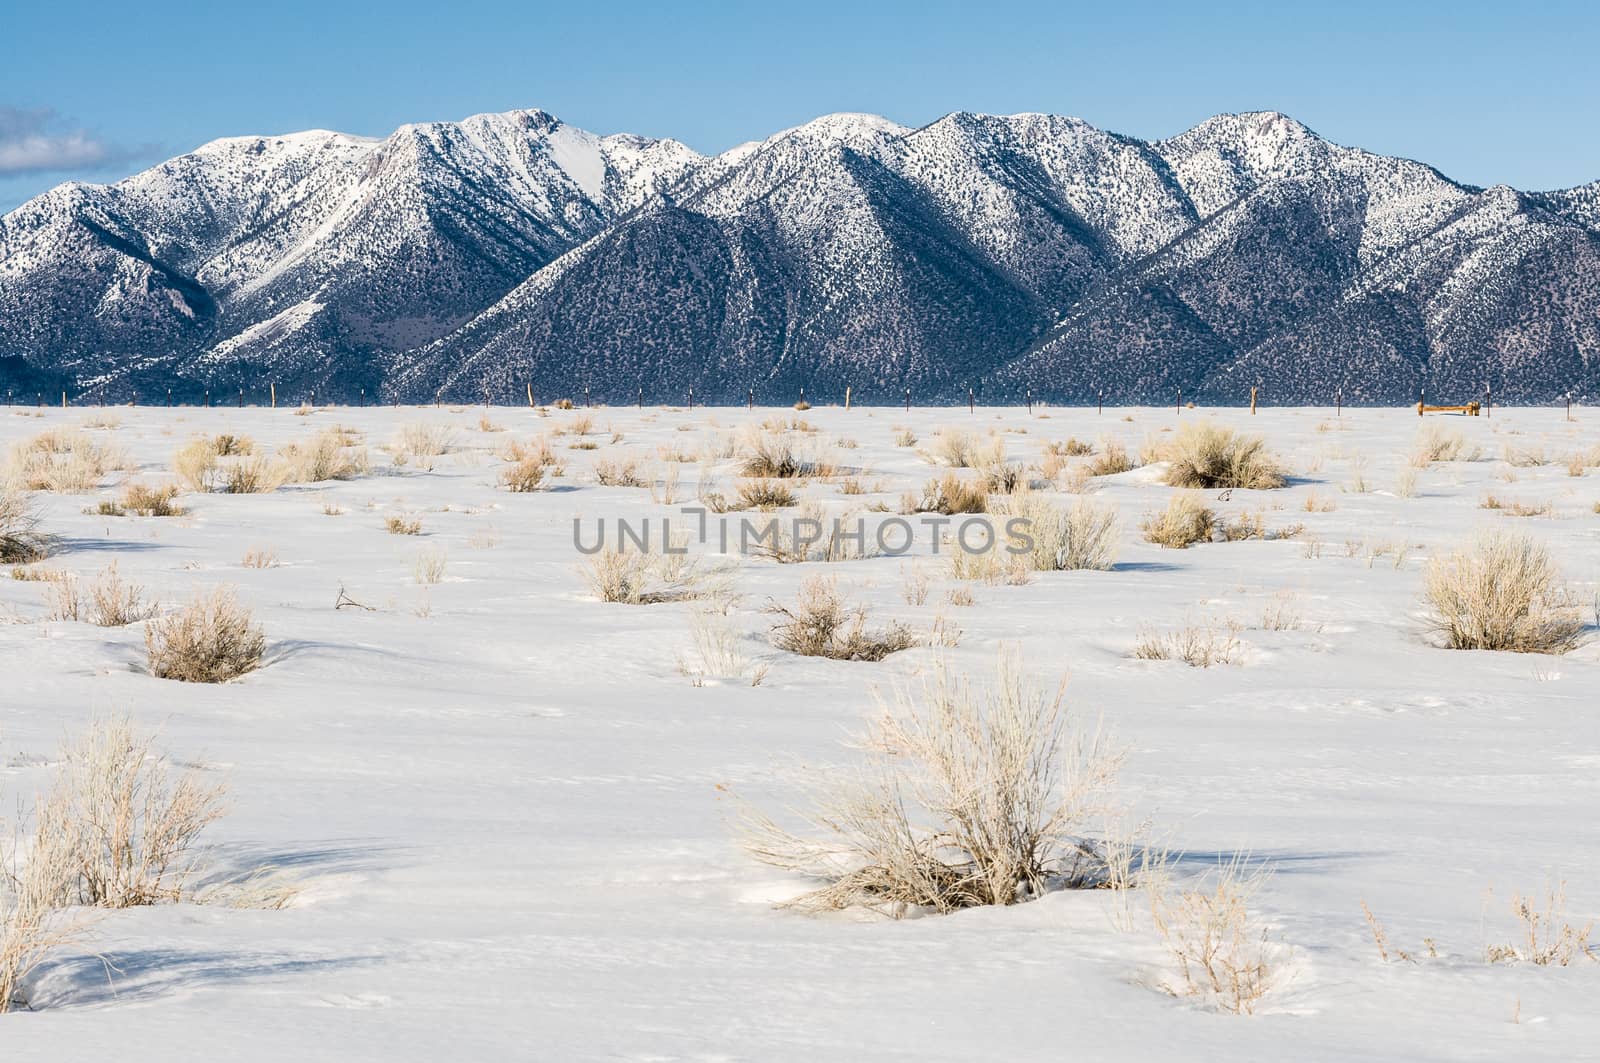 Snow covered ground with snow-capped mountains in background, Ca by Njean